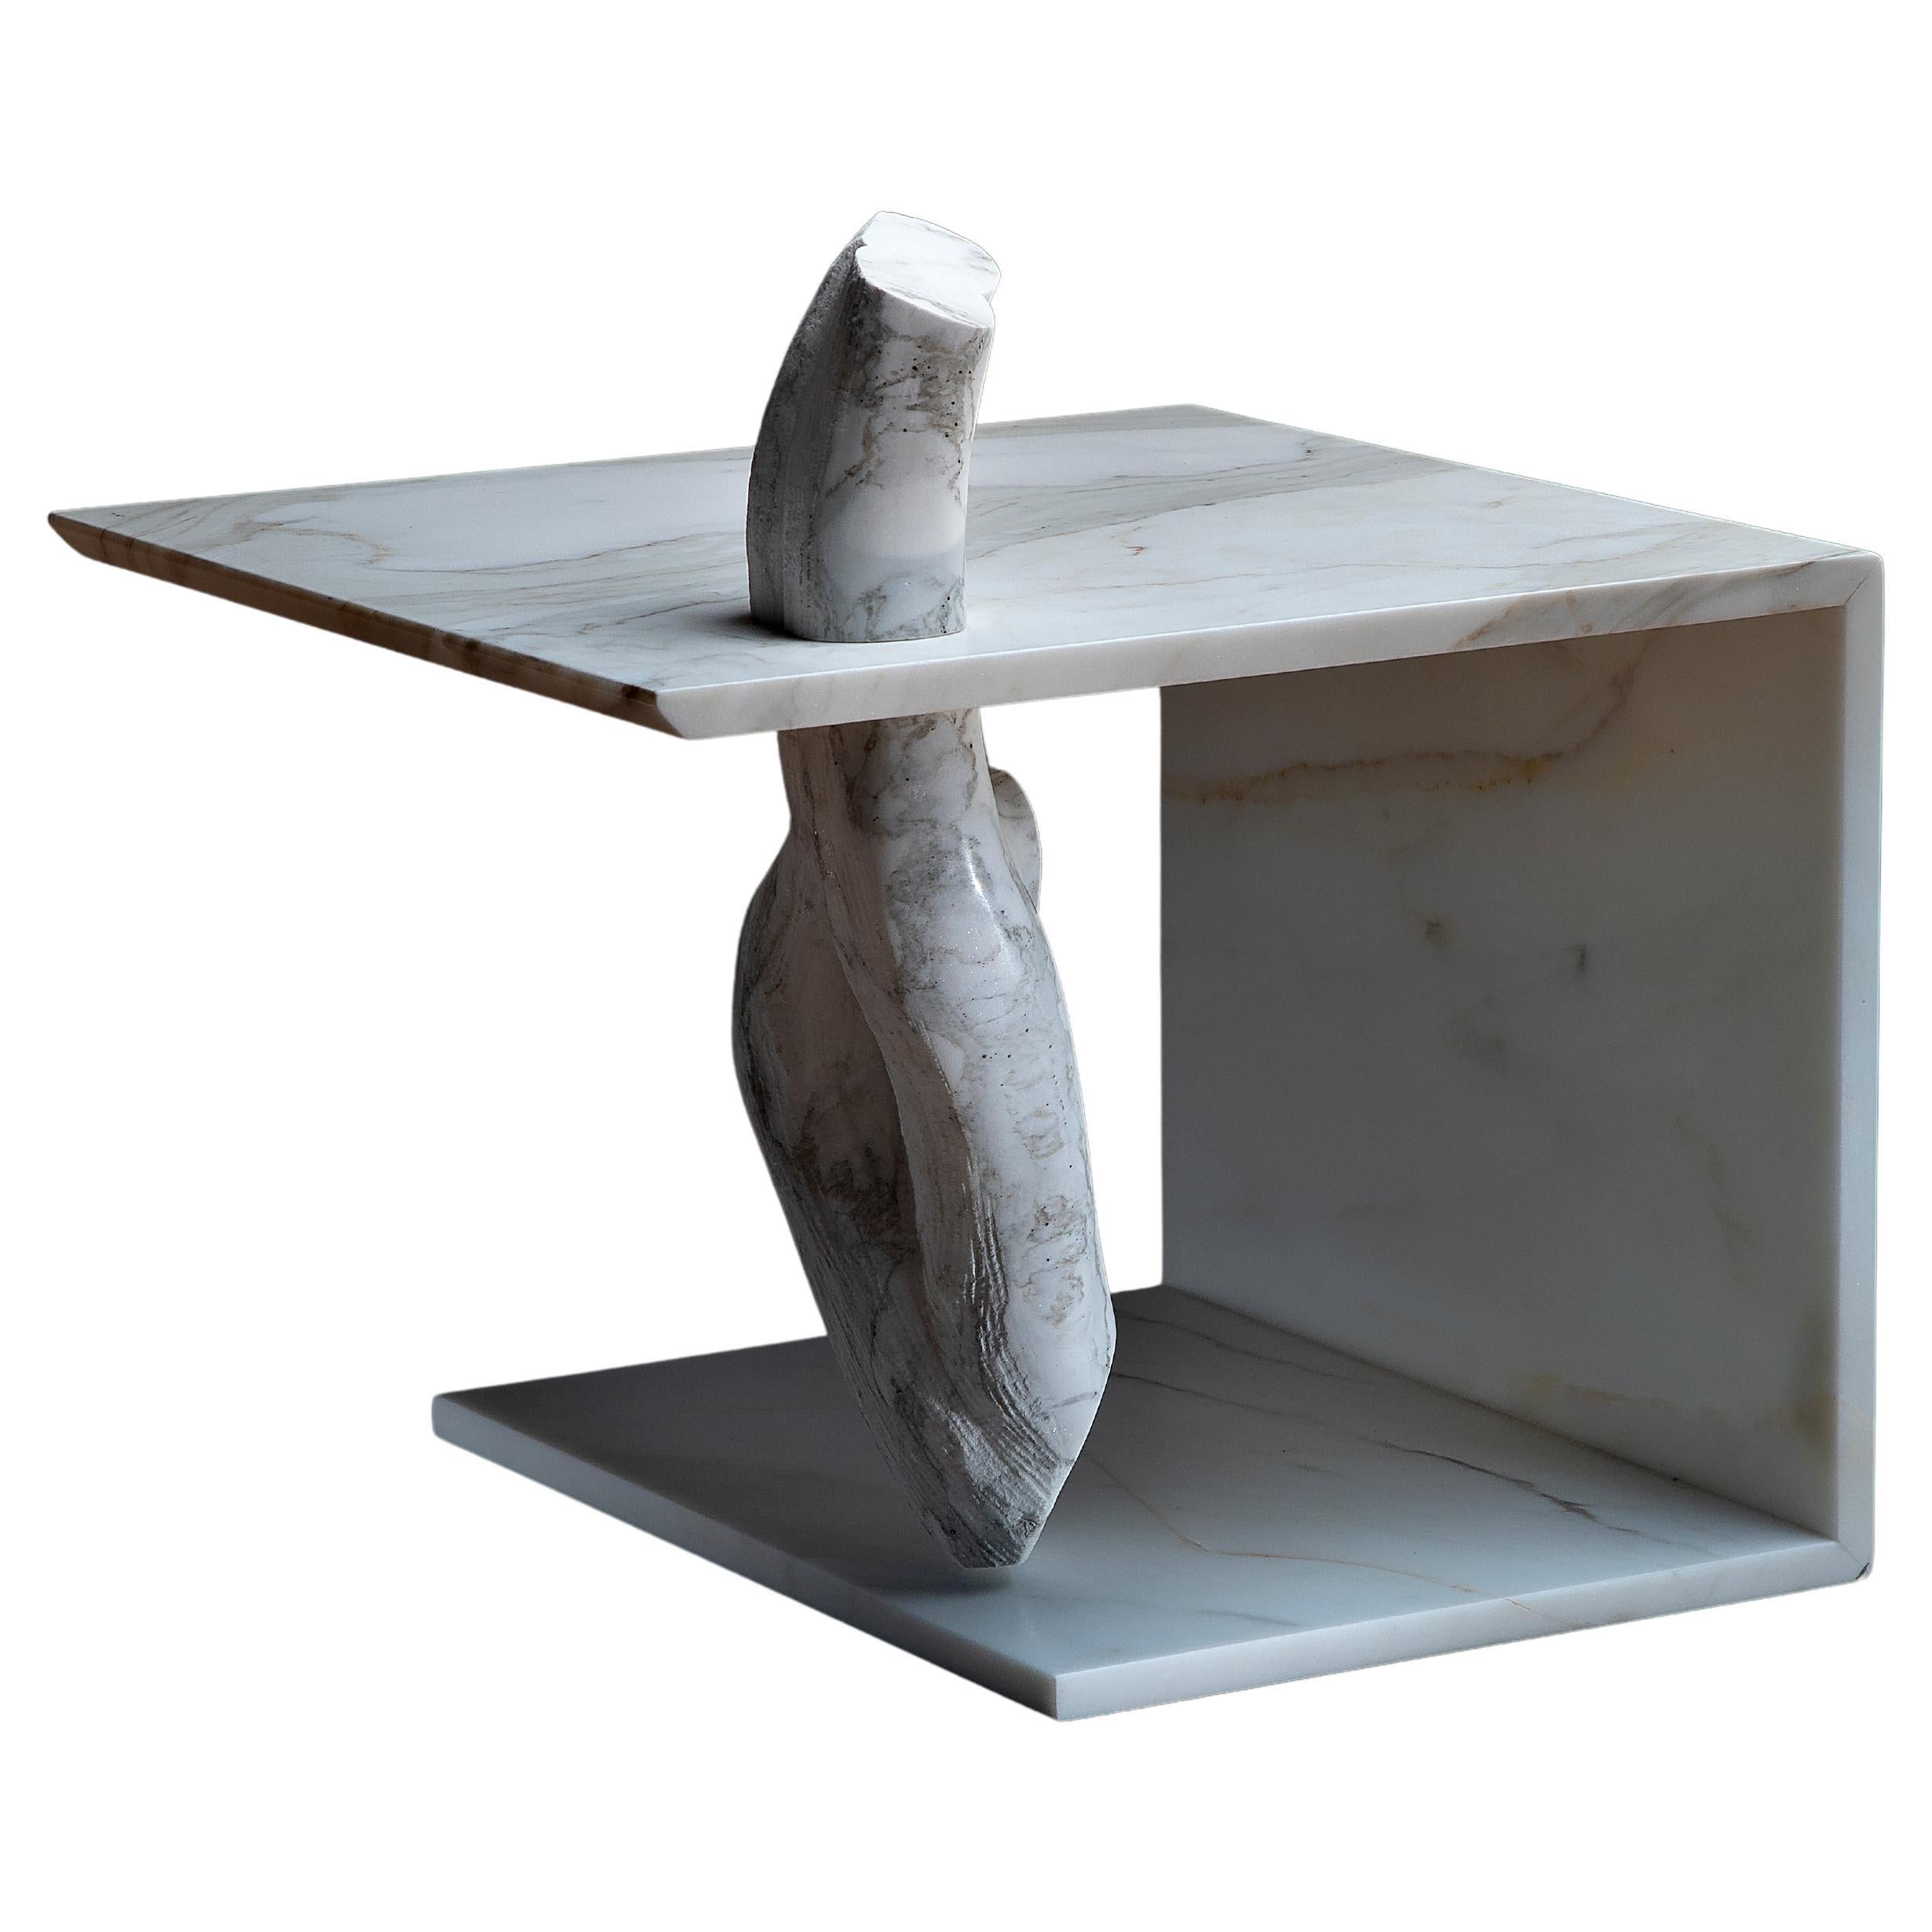 Capolino 1 sculpture coffee table in white veined marble For Sale